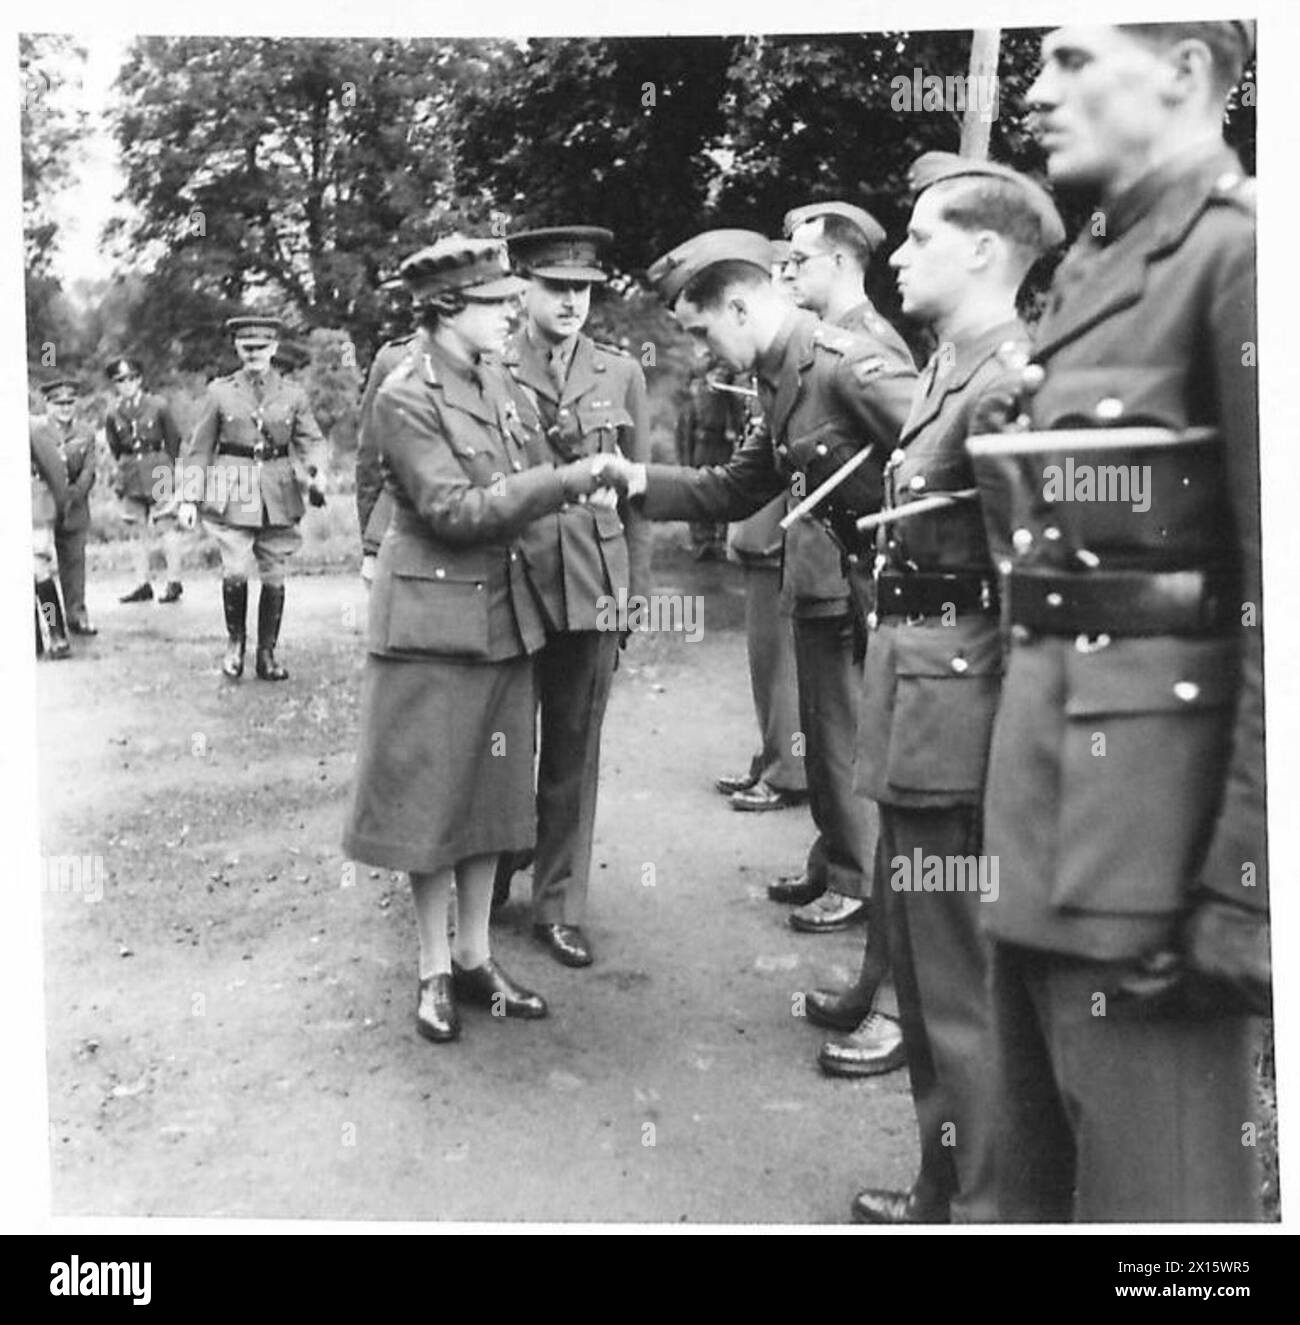 H.R.R. THE PRINCESS ROYAL VISITS NORTHERN IRELAND - H.R.H. is introduced to N.I.D. Signals officers by the Lt.Col. E.H. Cogan-Harris (Chief Signals Officer,NID) British Army Stock Photo